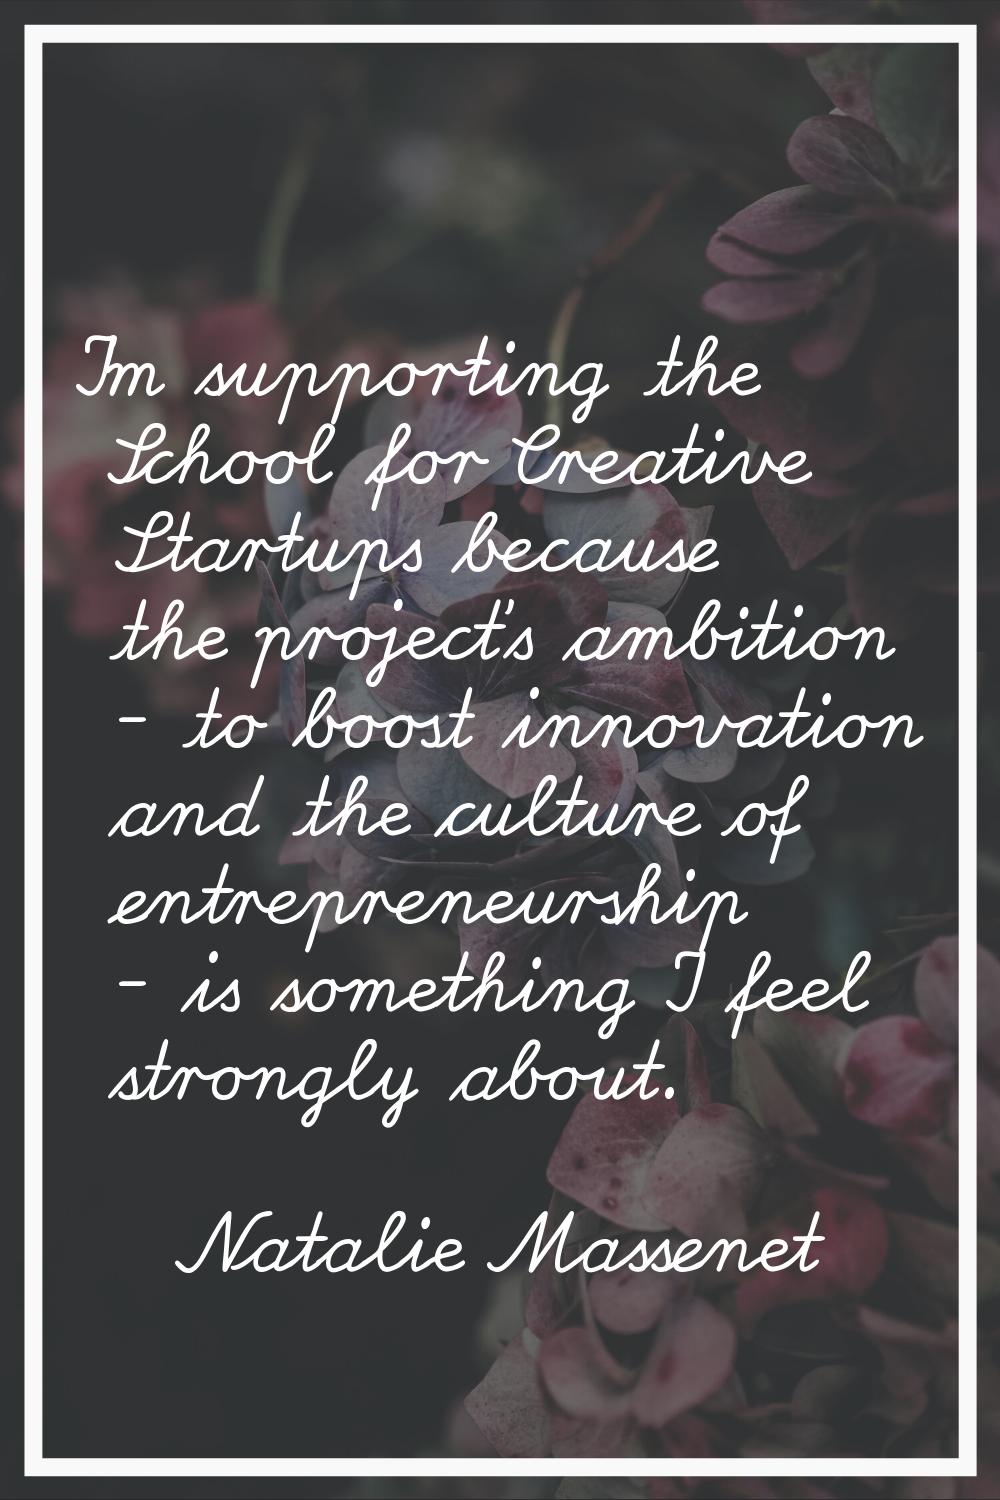 I'm supporting the School for Creative Startups because the project's ambition - to boost innovatio